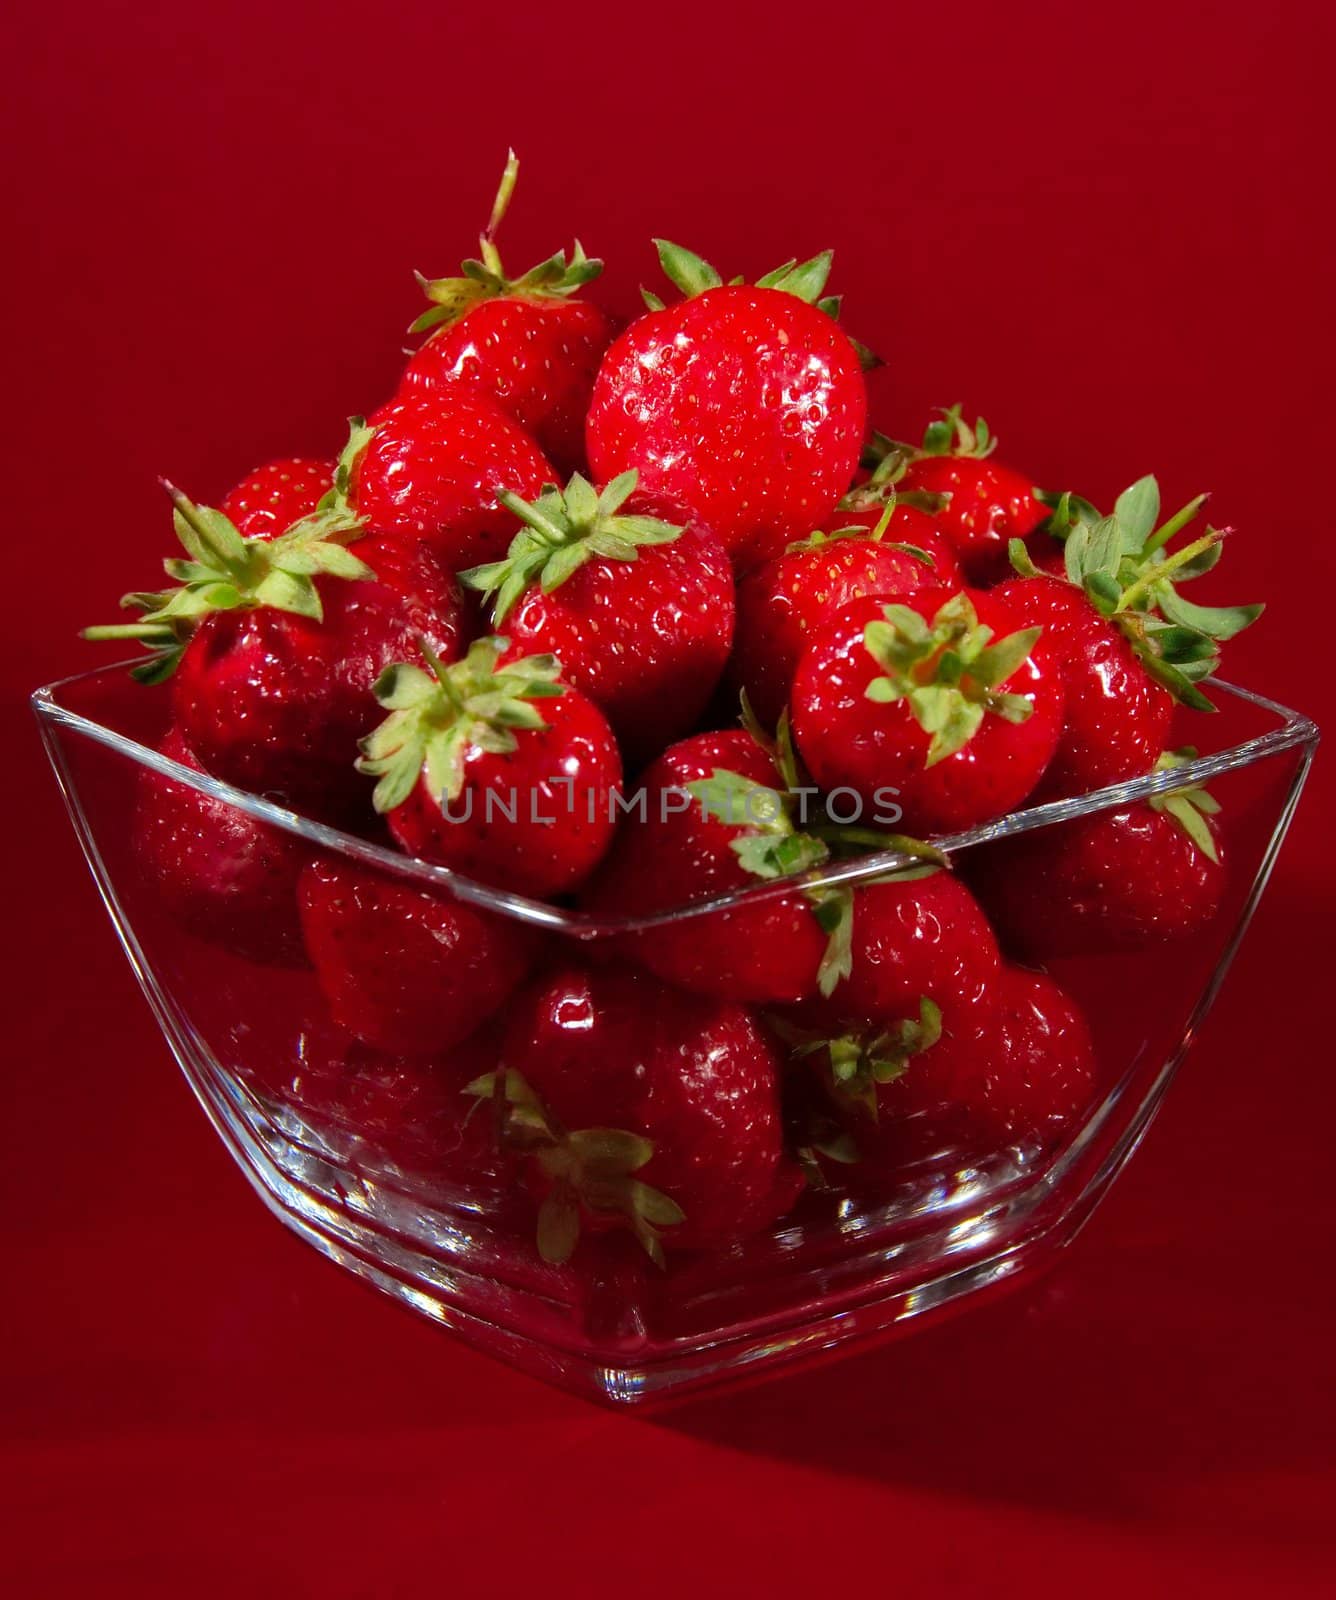 Shot of a pile of fresh strawberries by anki21